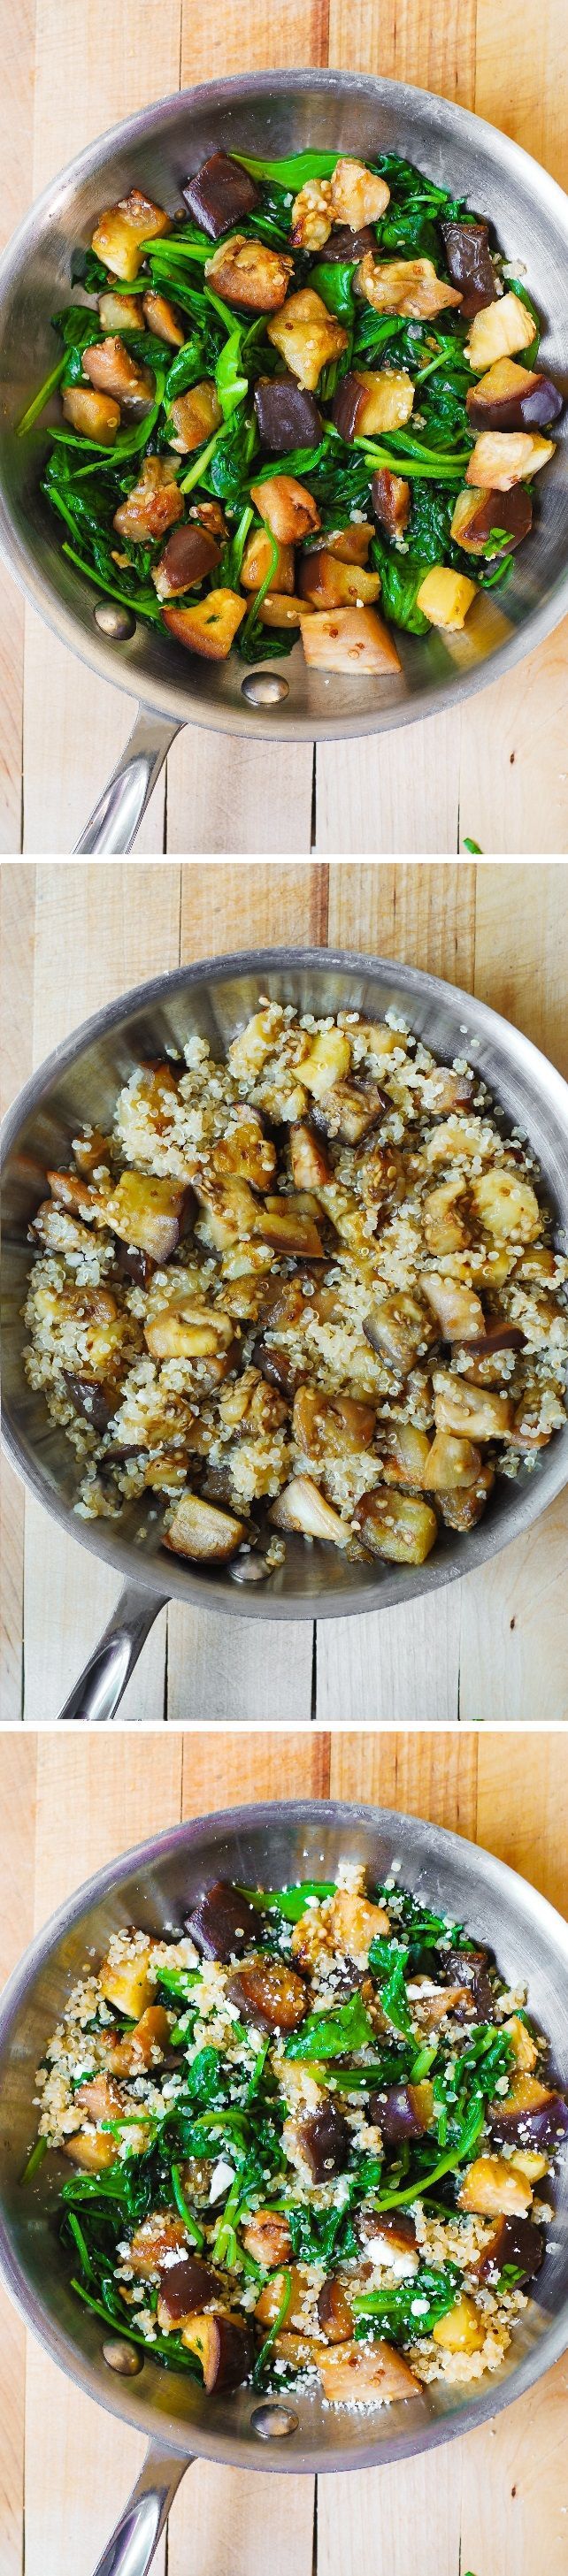 Roasted Eggplant with Spinach, Quinoa, and Feta. Healthy comfort food – vegetarian, gluten-free, low calorie, low carb and low